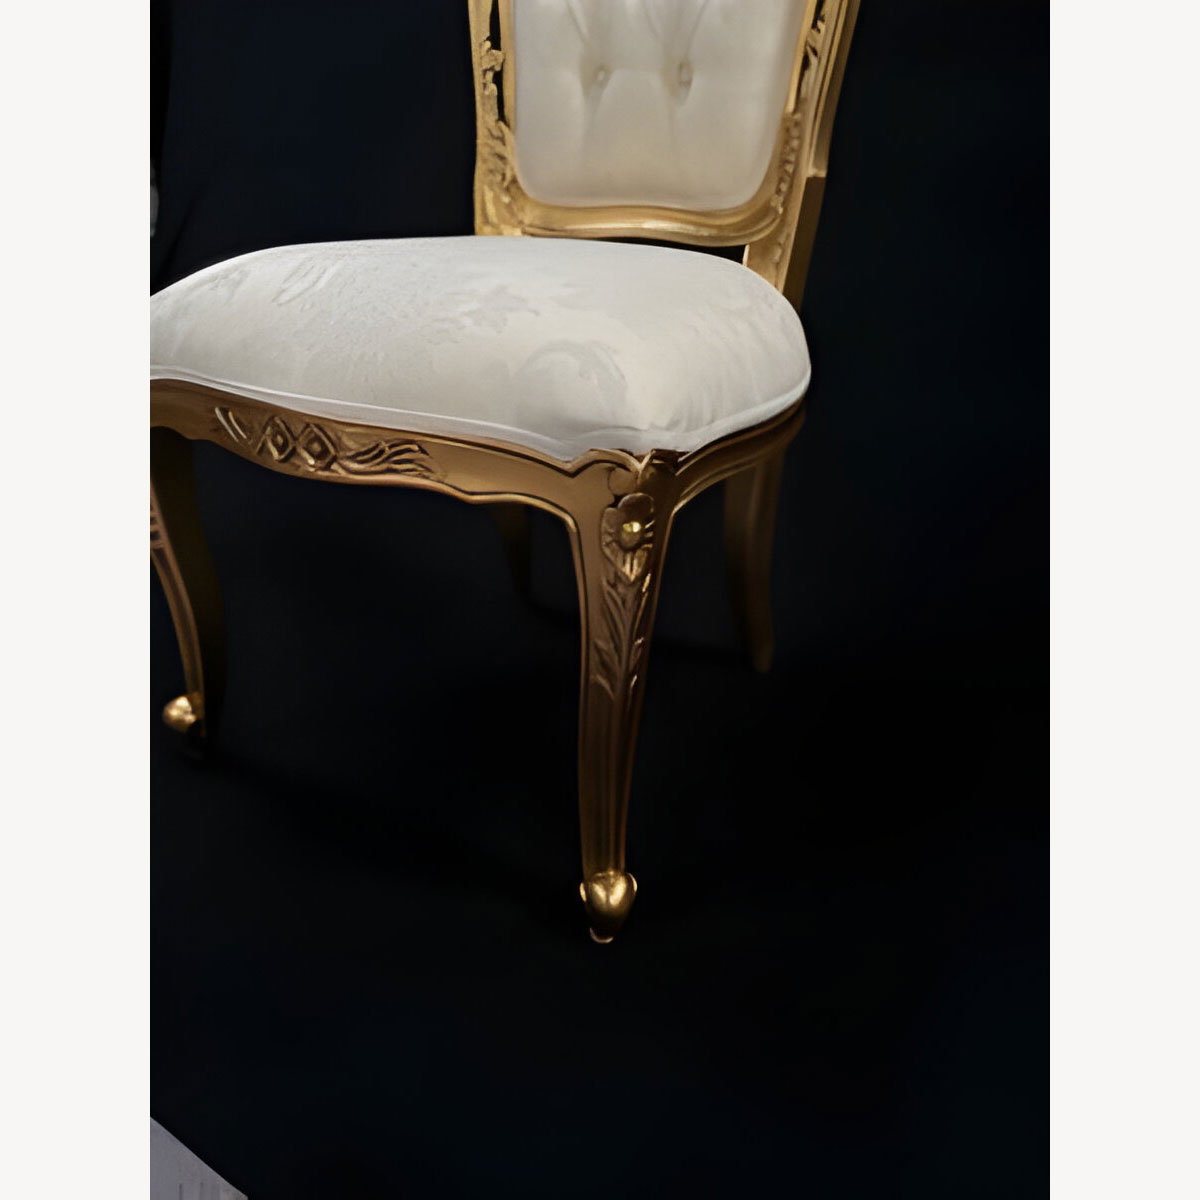 Franciscan Chair In Gilded Gold And Ivory Cream Dining Or Occasional 3 - Hampshire Barn Interiors - Franciscan Chair In Gilded Gold And Ivory Cream (Dining Or Occasional) -